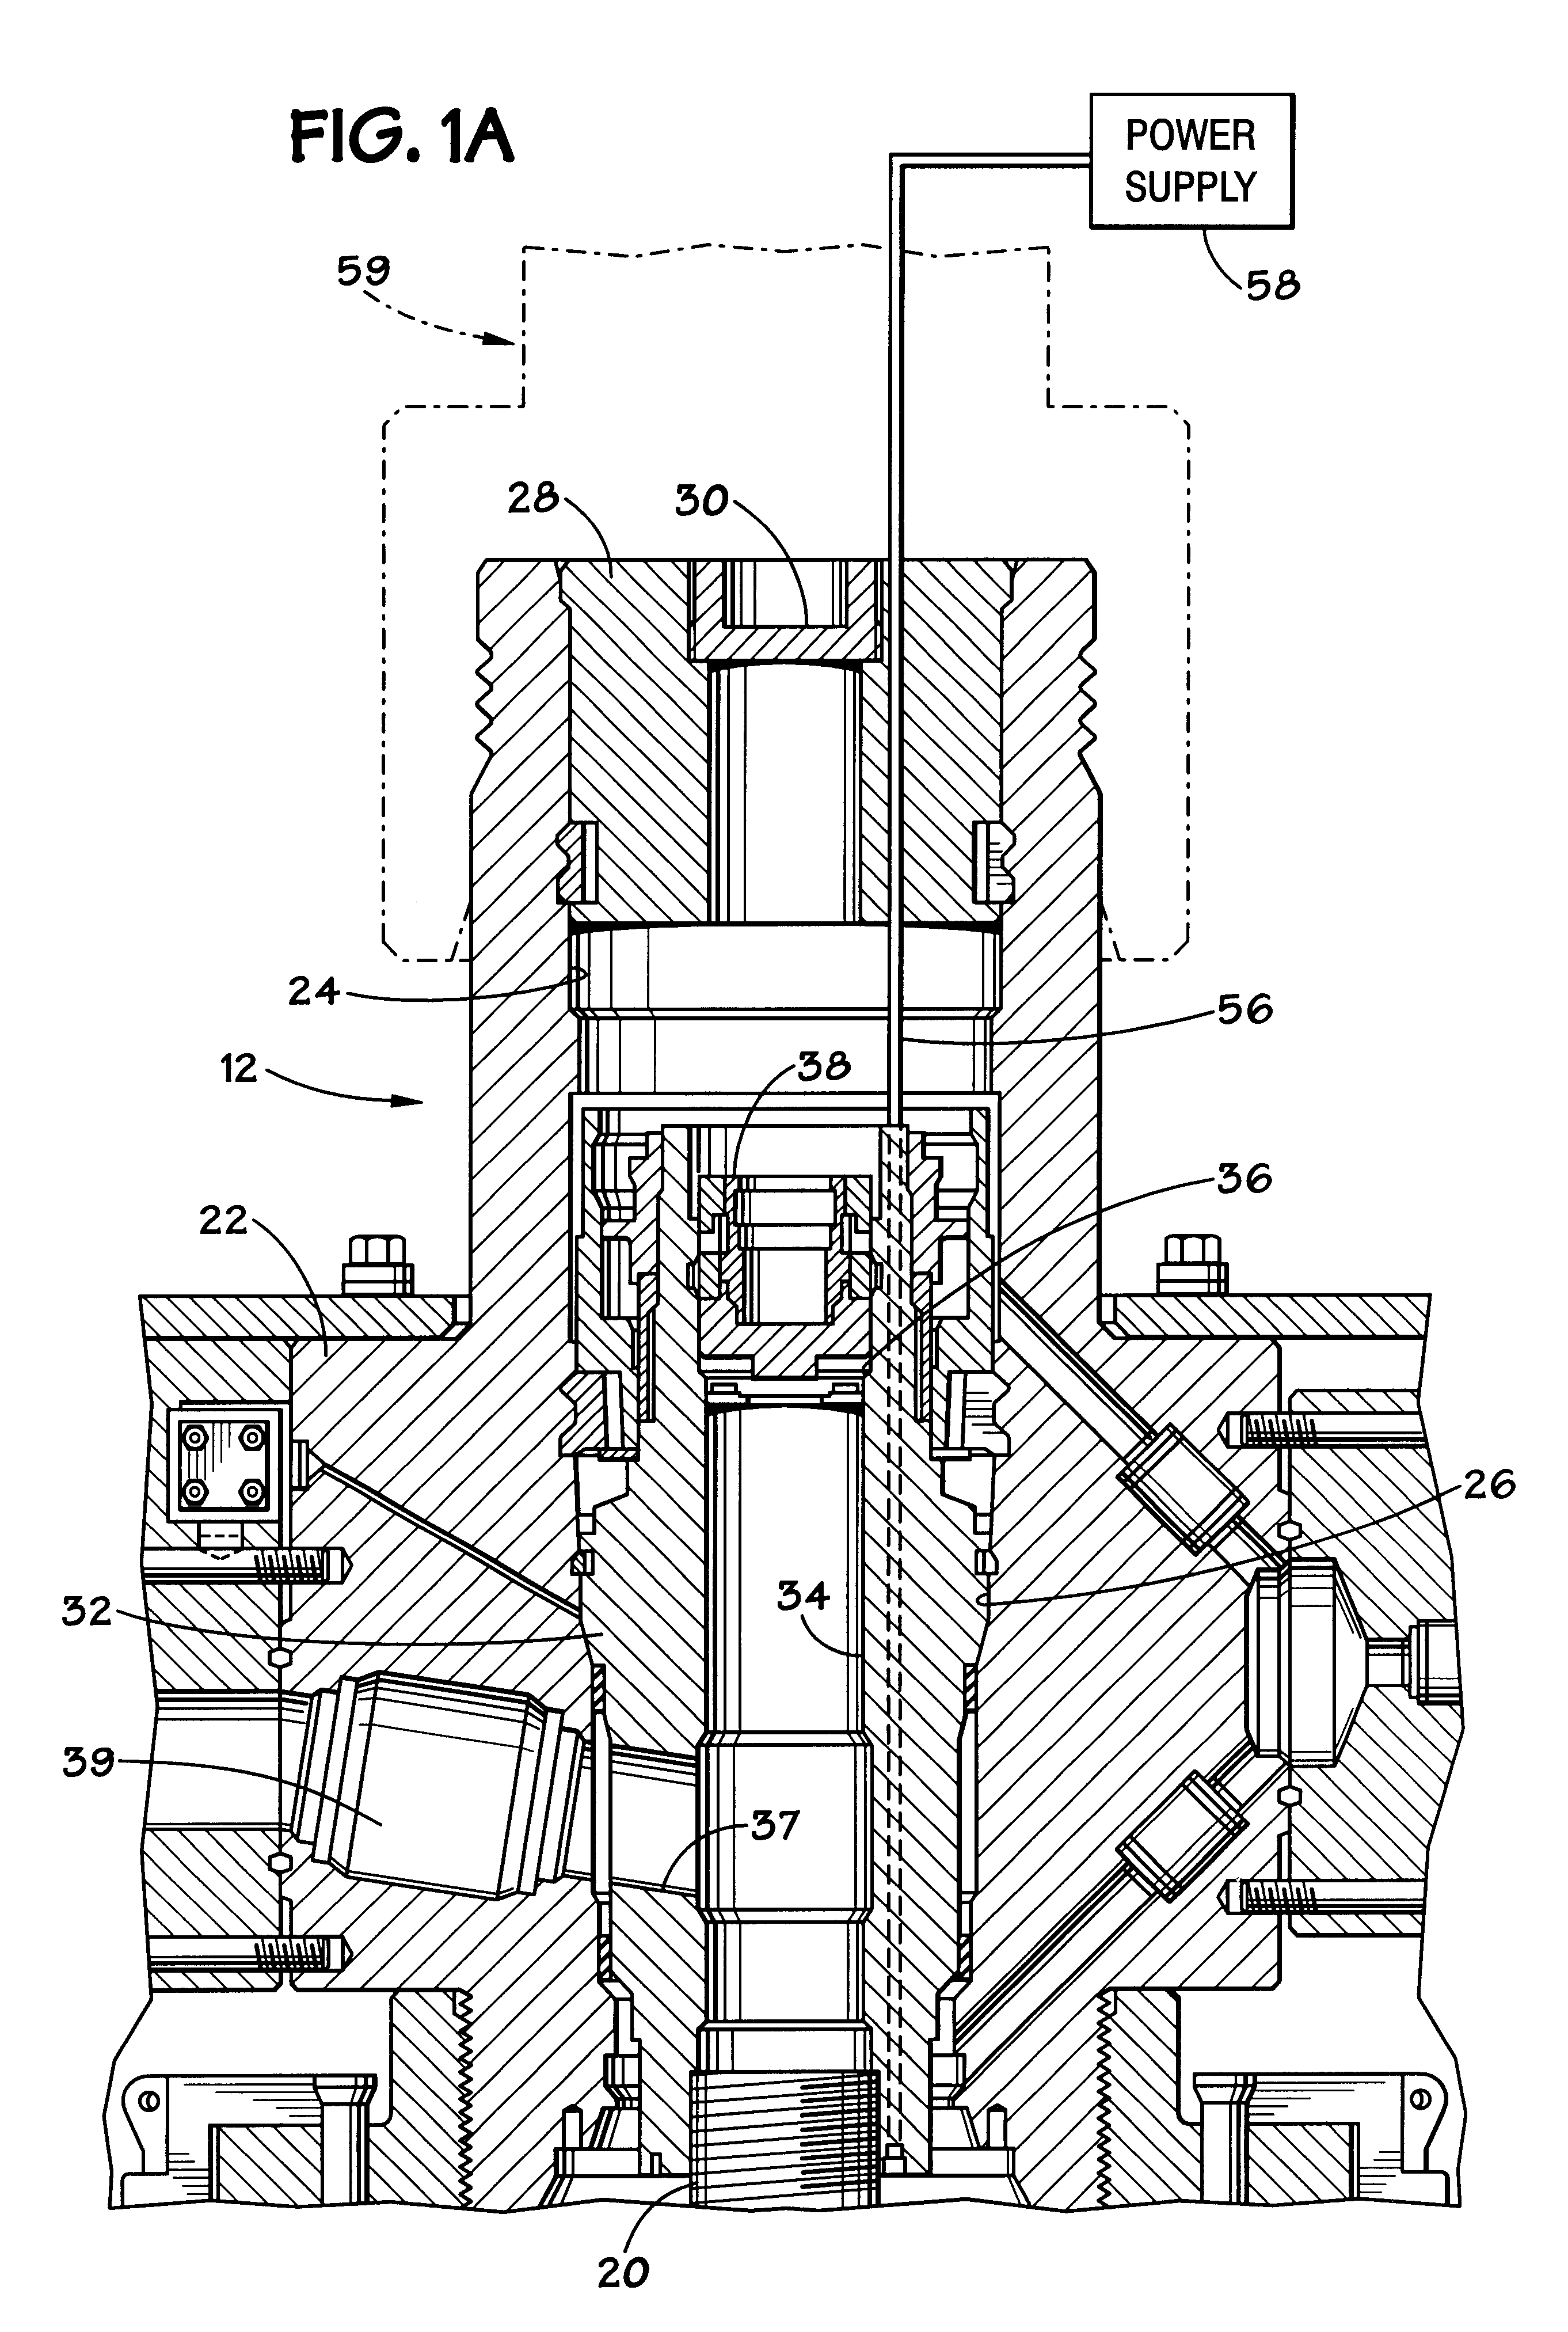 Progressive production methods and system